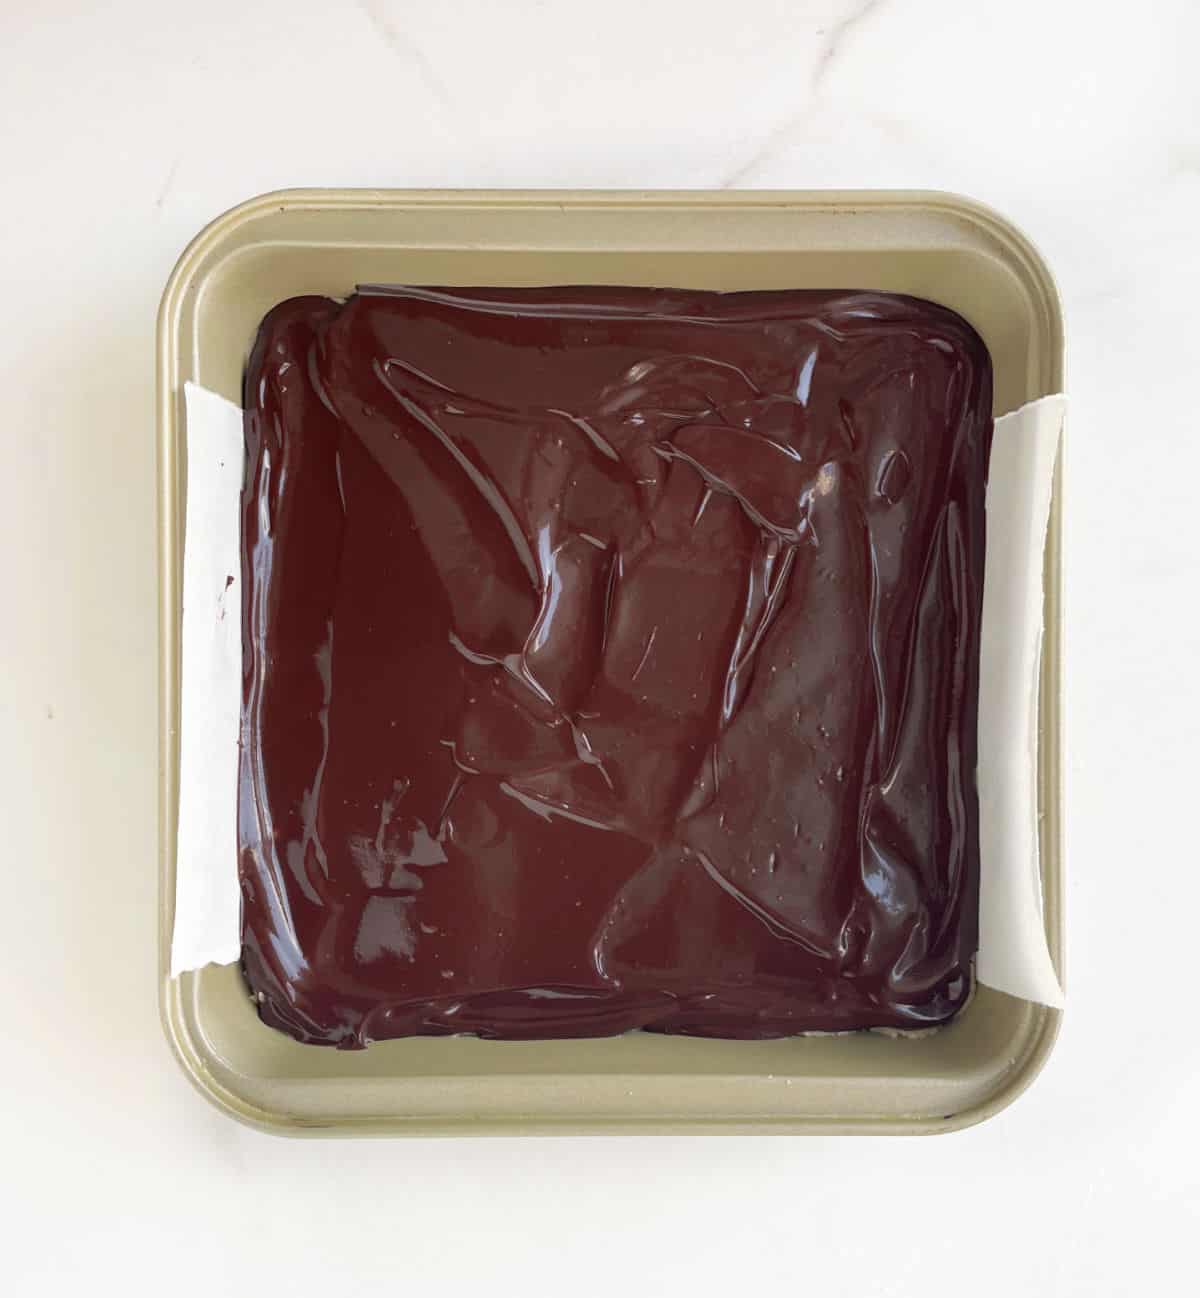 Chocolate coated fudge in a square baking pan on white marble.